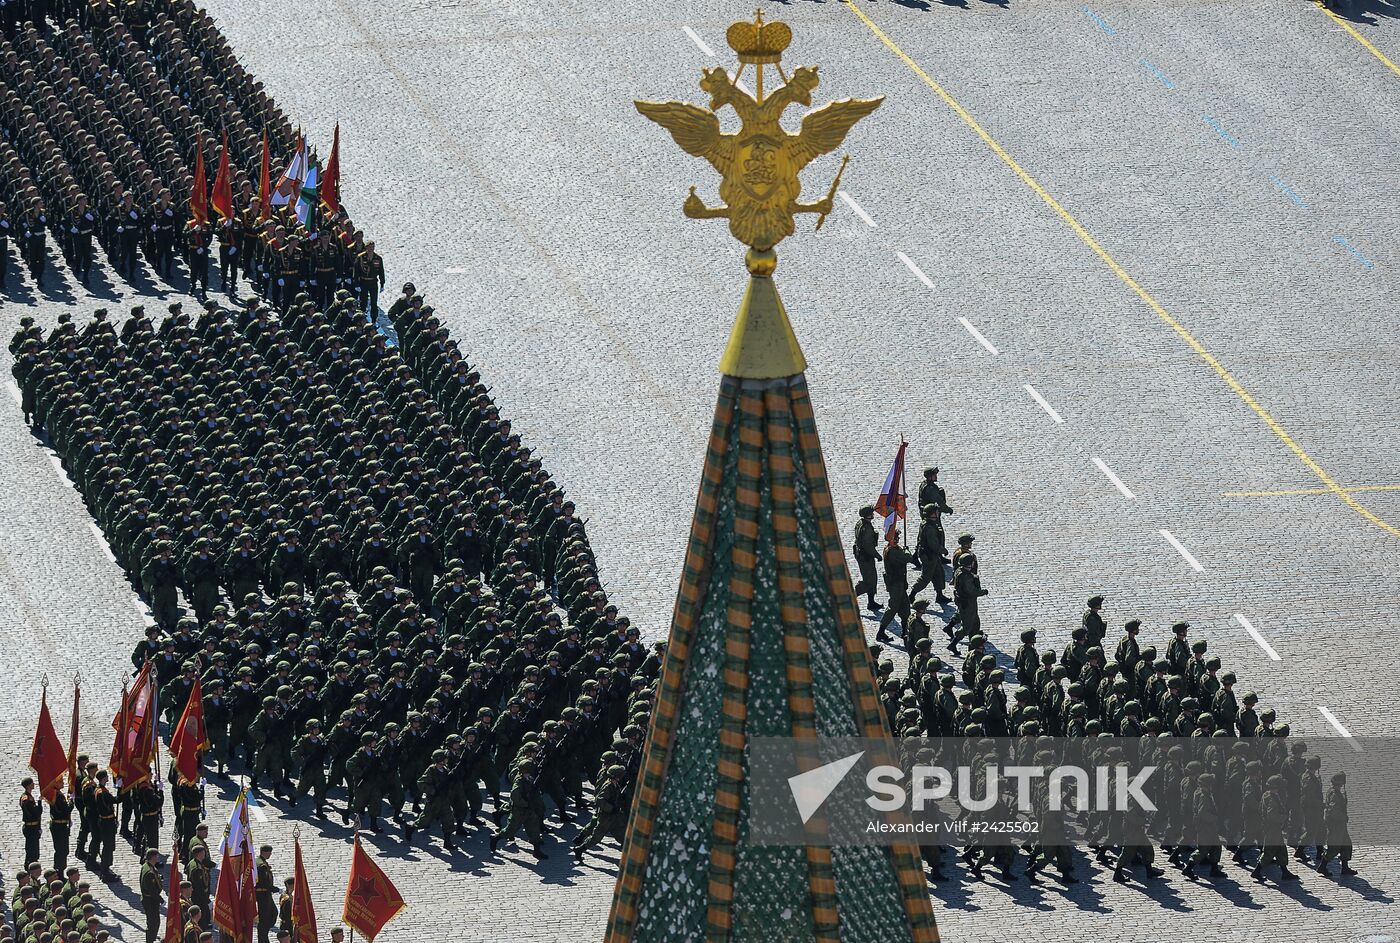 Parade on 69th anniversary of victory in Great Patriotic War